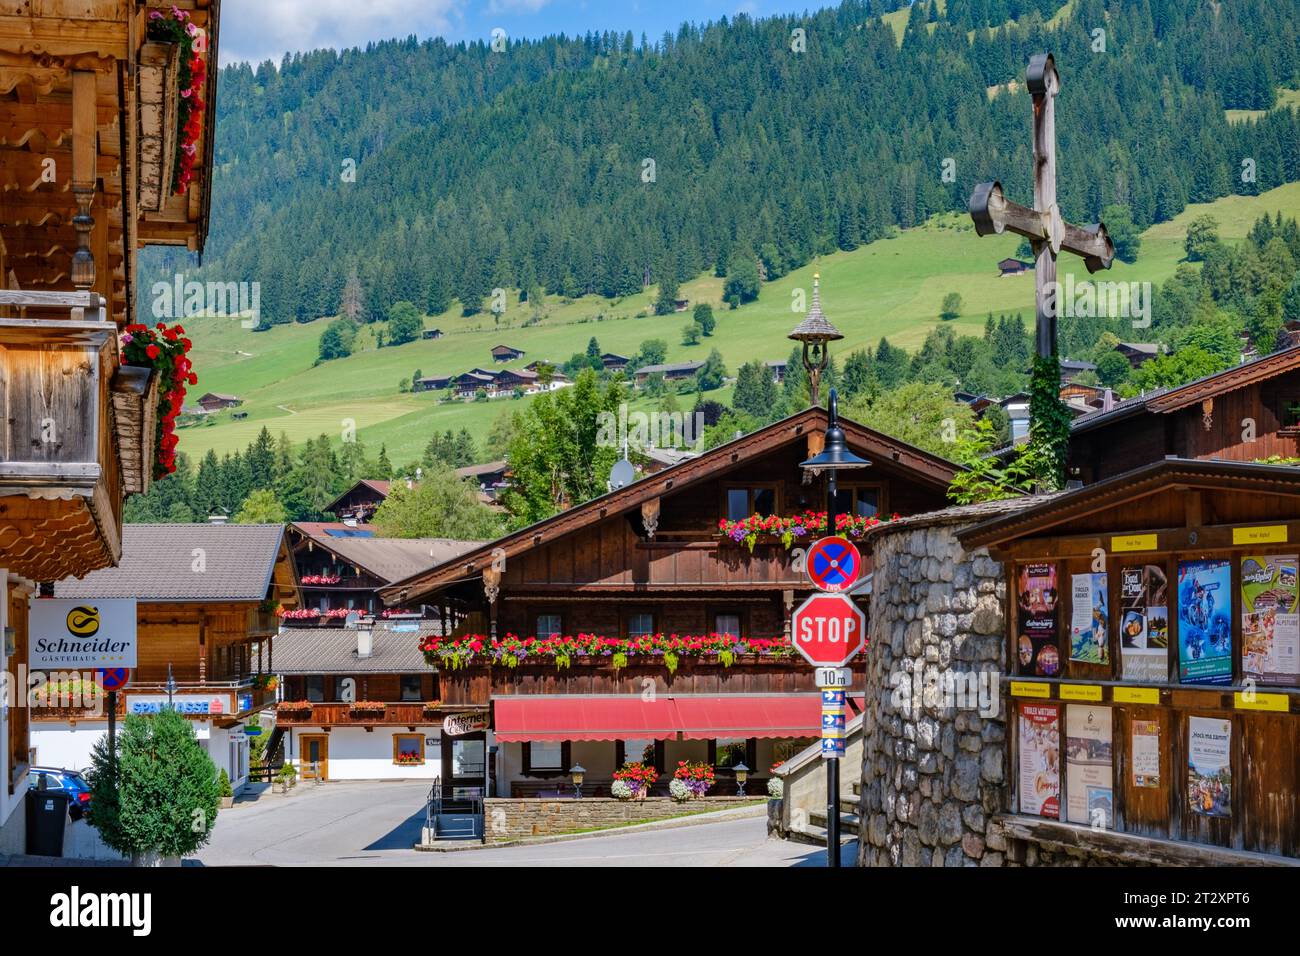 The centre of sloping Alpbach Village, traditional Alpine architecture, flowers on balconies, meadows, tall trees. Tyrol, Austria. Stock Photo